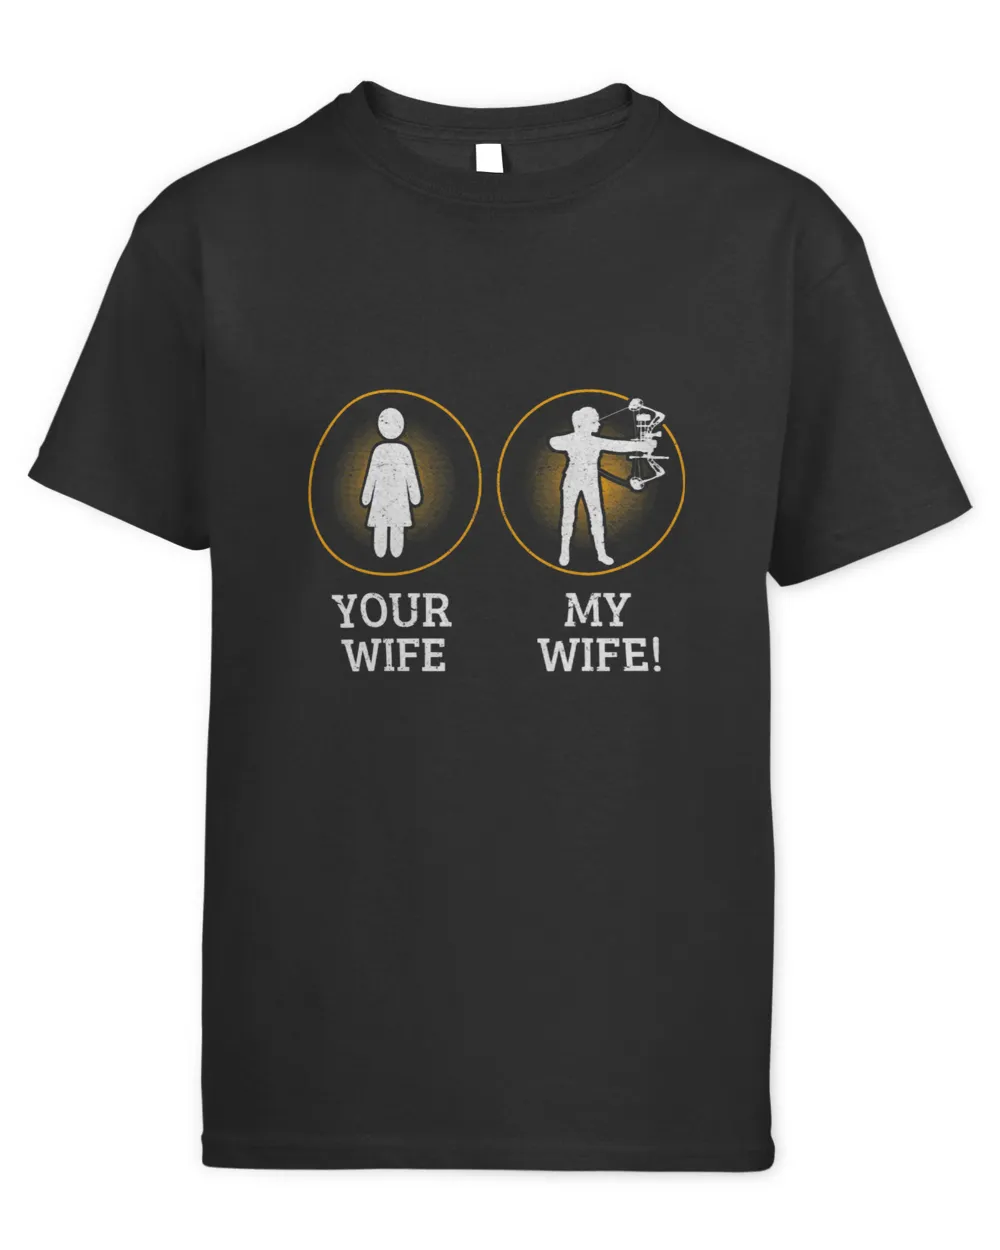 Archery Bow Your Wife My Wife Archery Archer Bowhunter Arrow Toxophilite